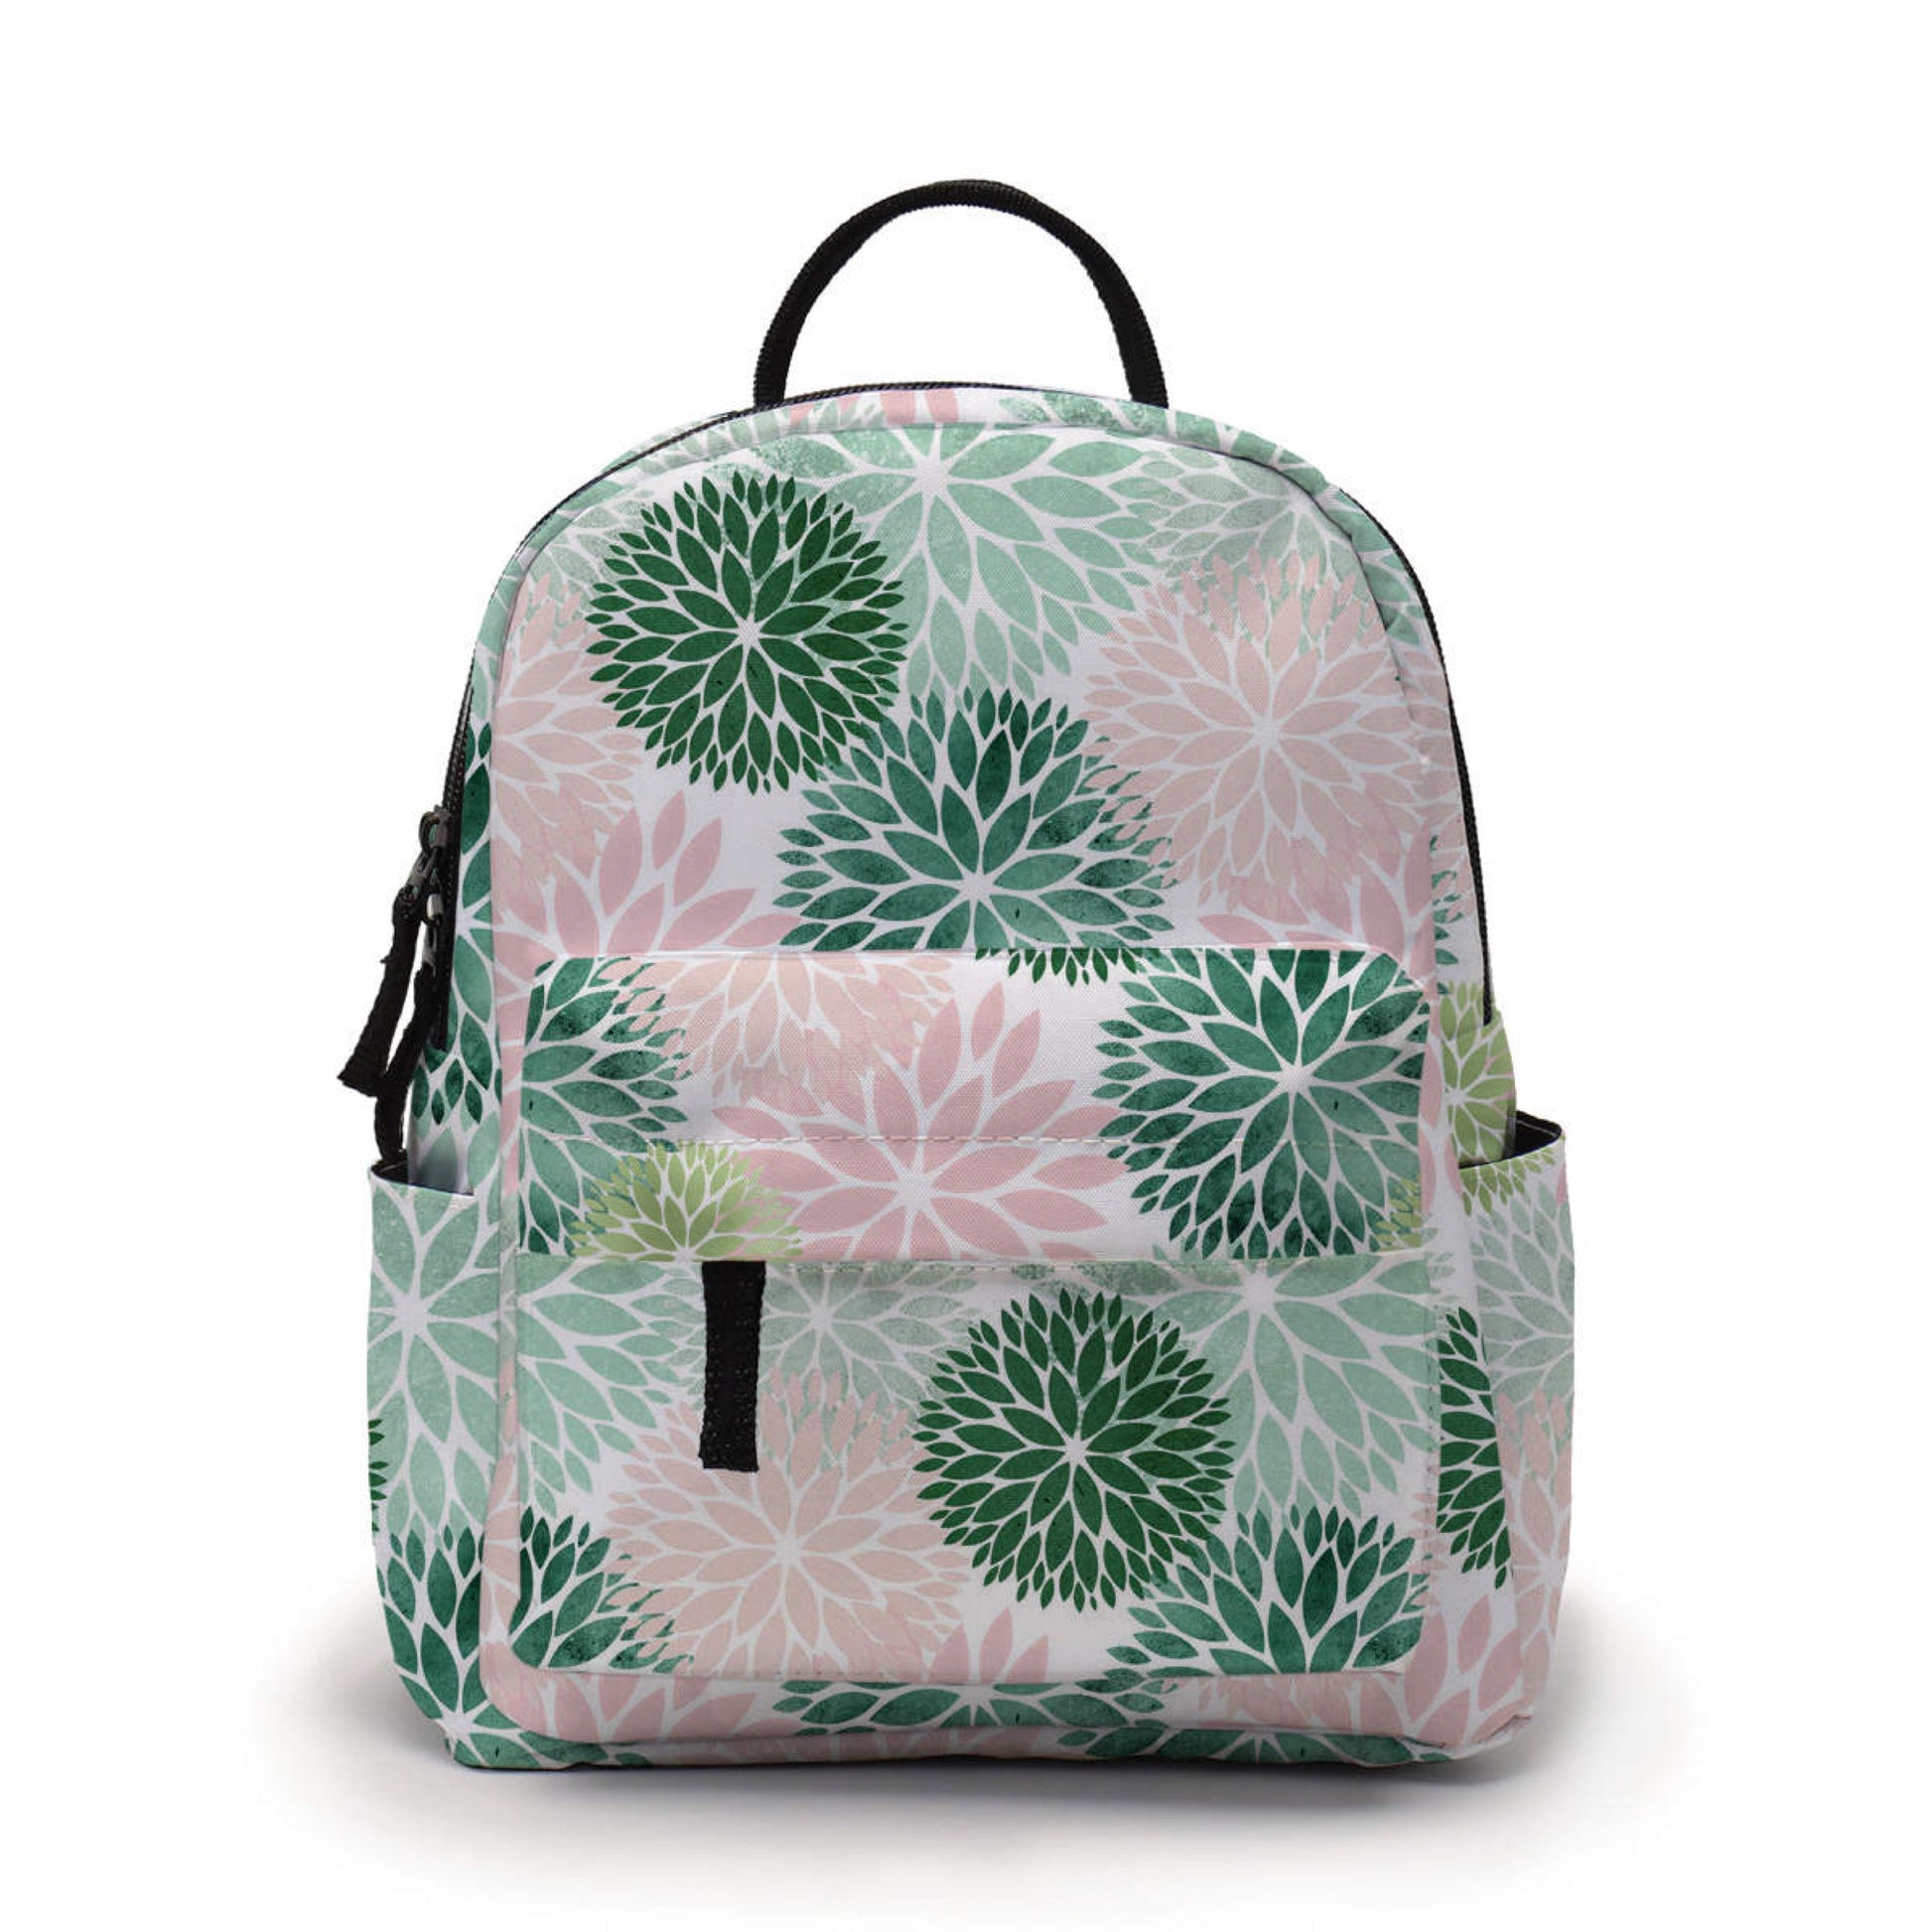 Mini Backpack - Floral Green Pink Dahlia - Three Bears Boutique